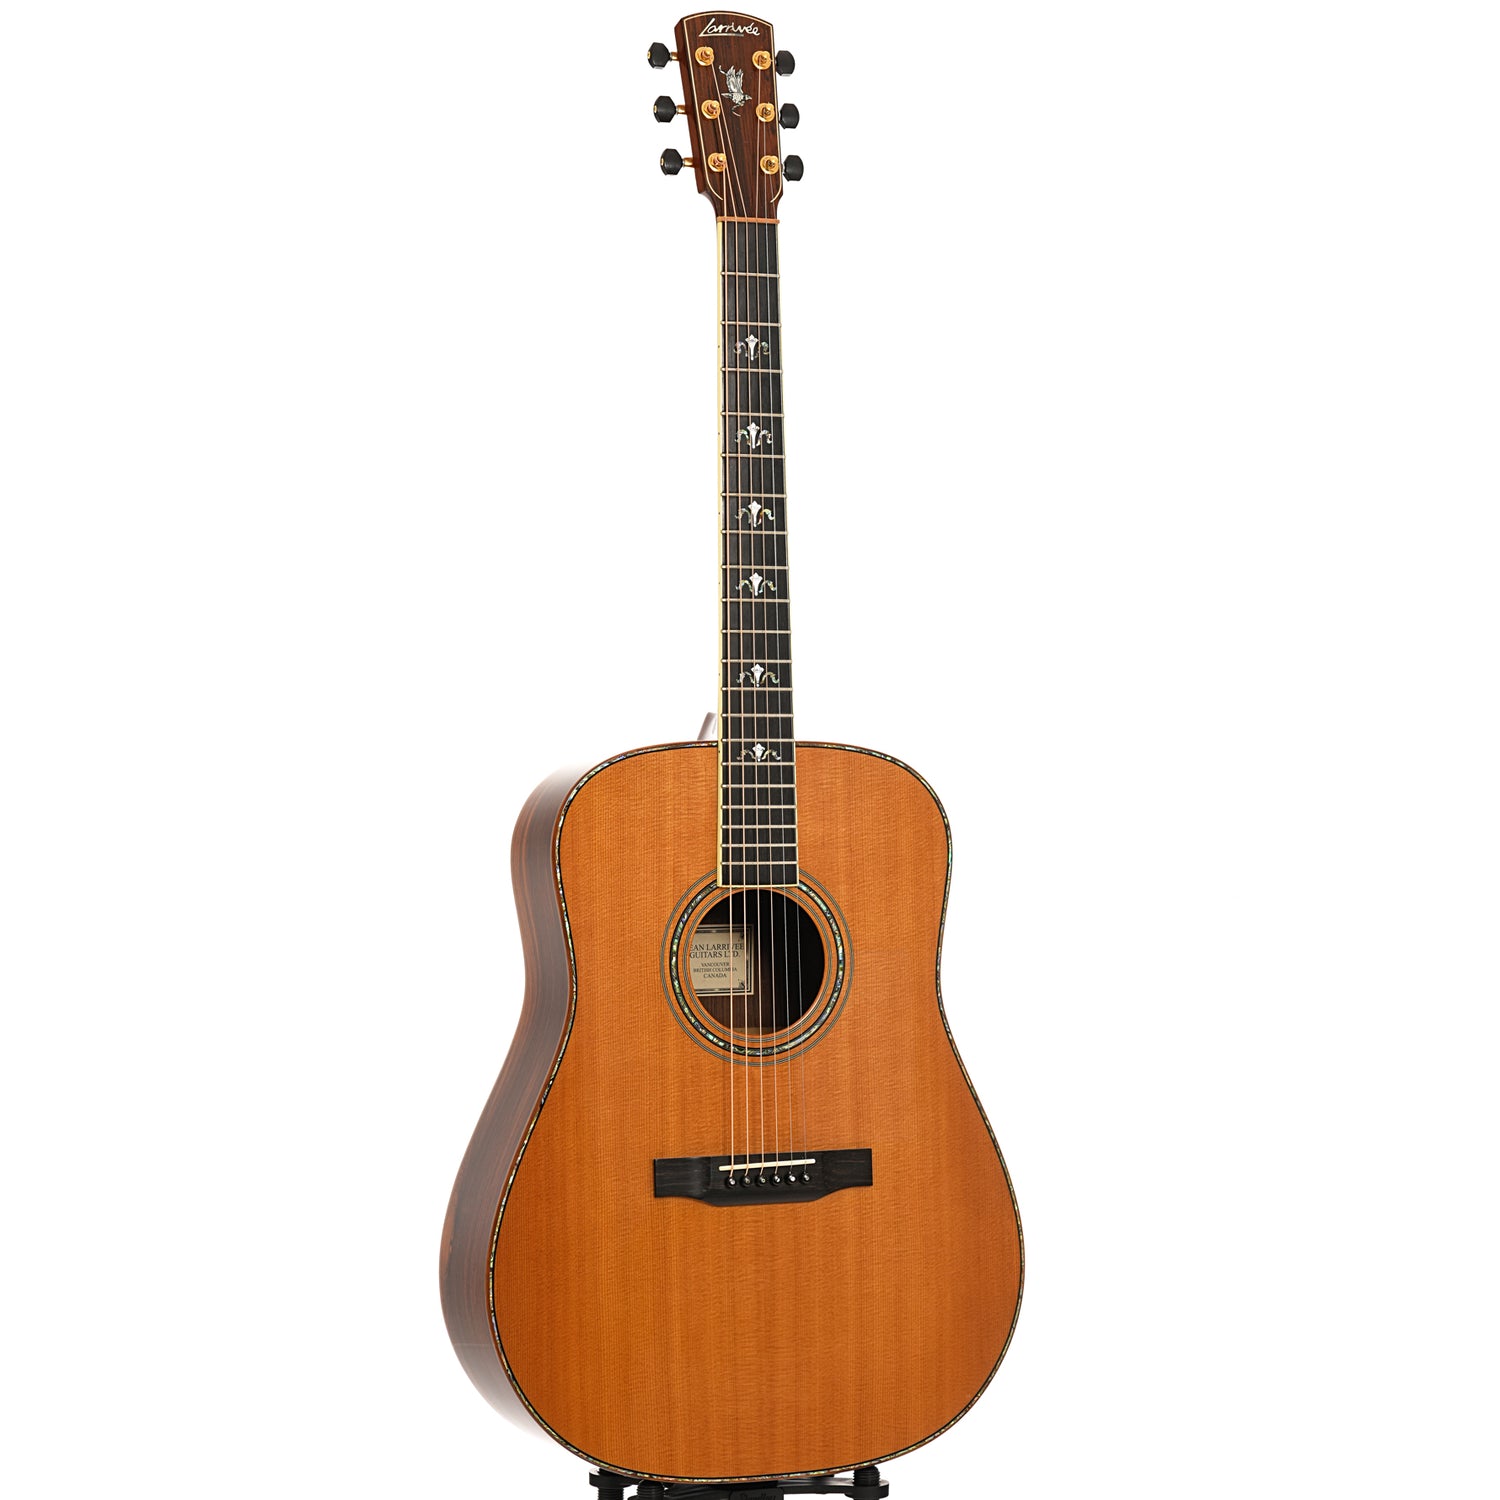 Full front and side of Larrivee D-10 Brazilian Acoustic